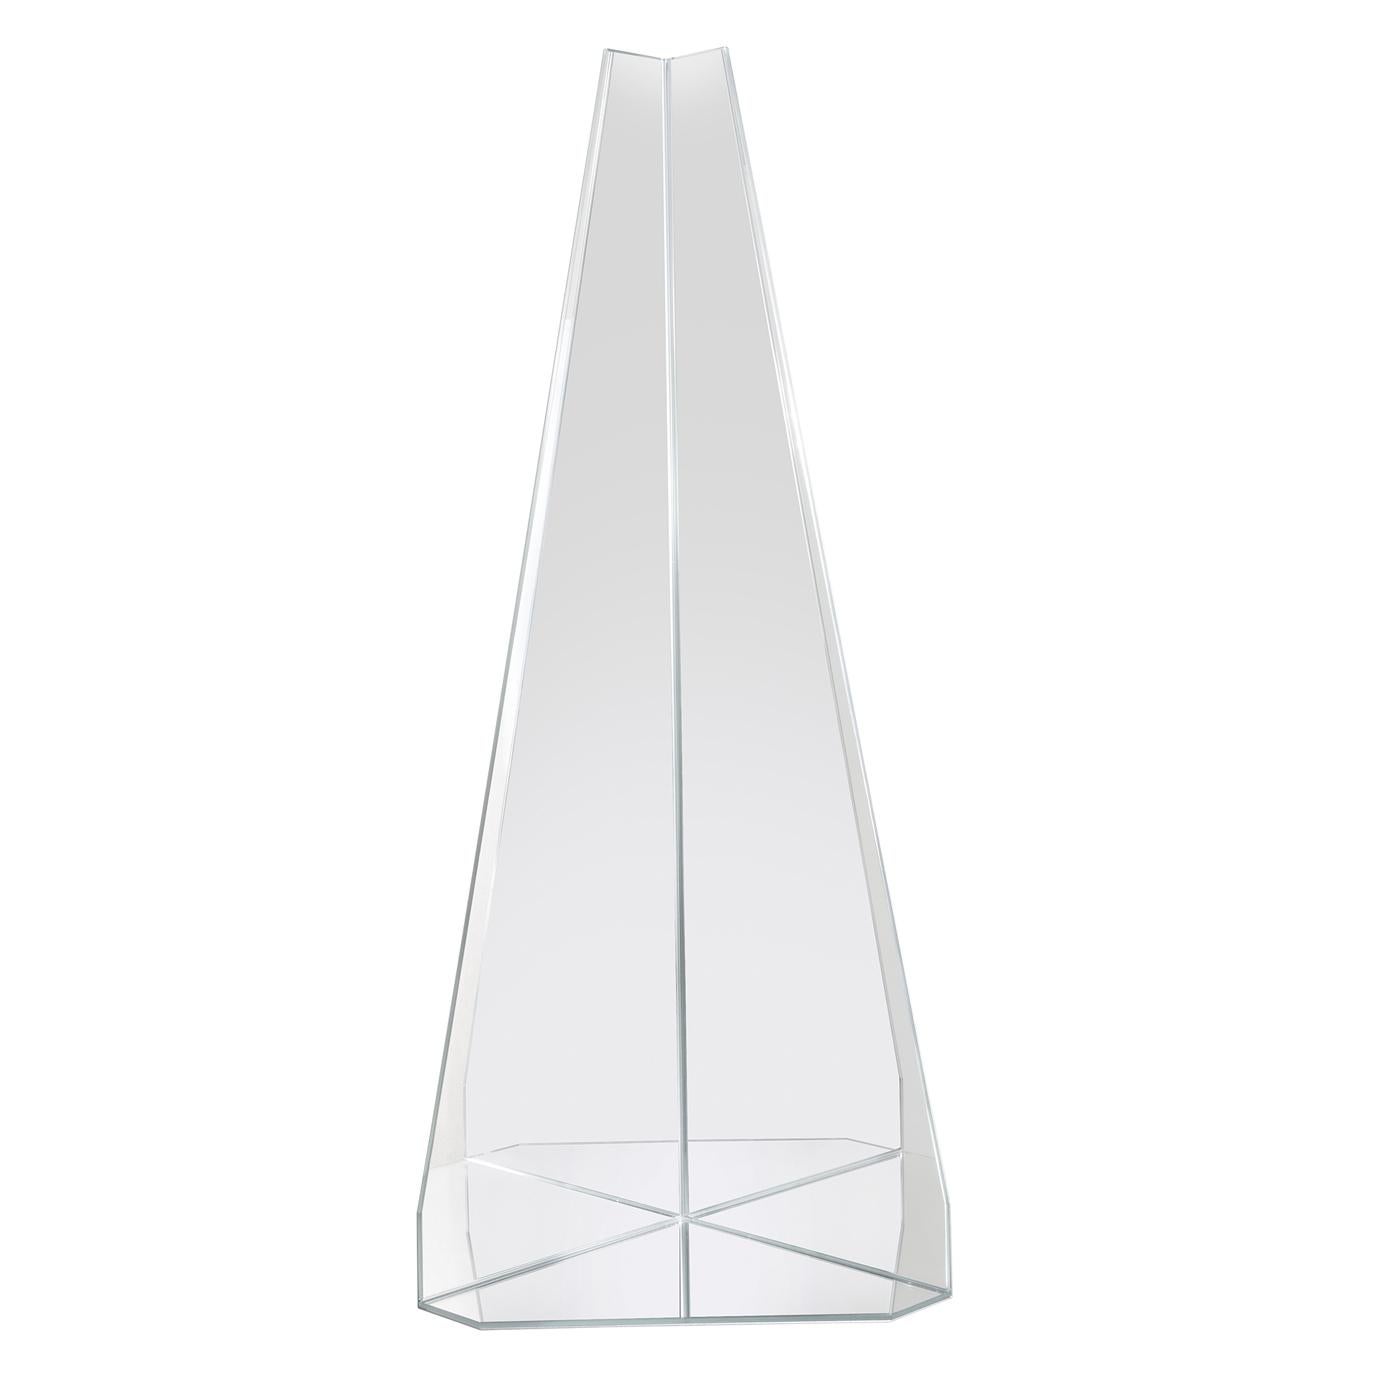 Designed by Marco Brunori, this wall mirror is a superb accent in a modern or eclectic interior. Thanks to the extra clear finish of its surface, the prism-shaped silhouette will reflect the surrounding light evoking the brilliance of a ray of sun,